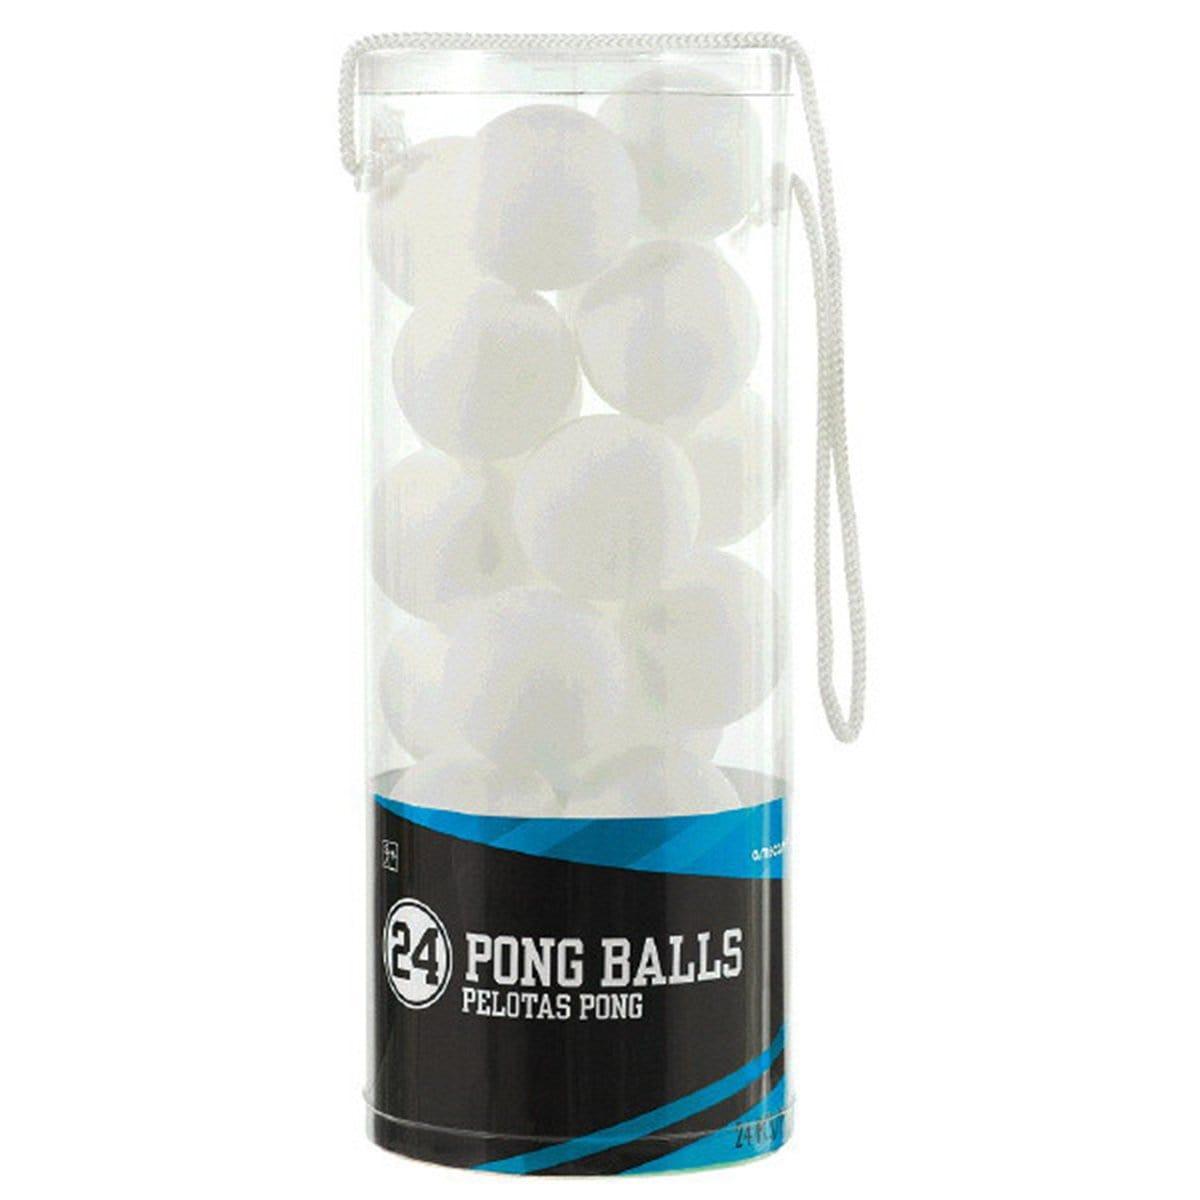 Buy Games Pong Balls, 24 Count sold at Party Expert